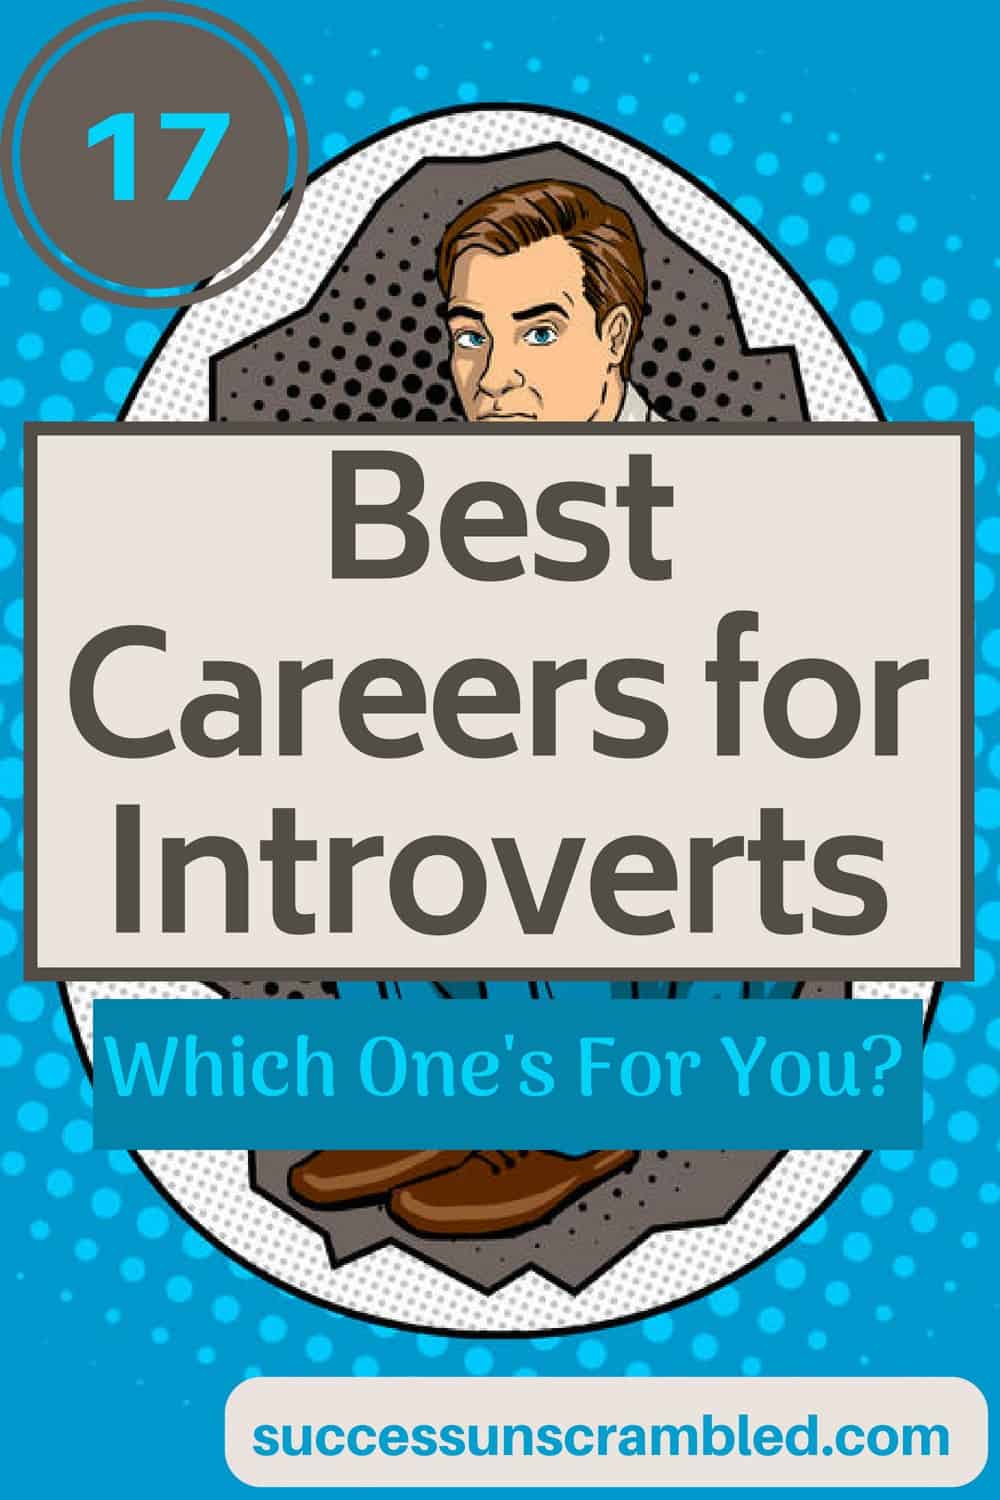 17 Best Careers for Introverts on LinkedIn 